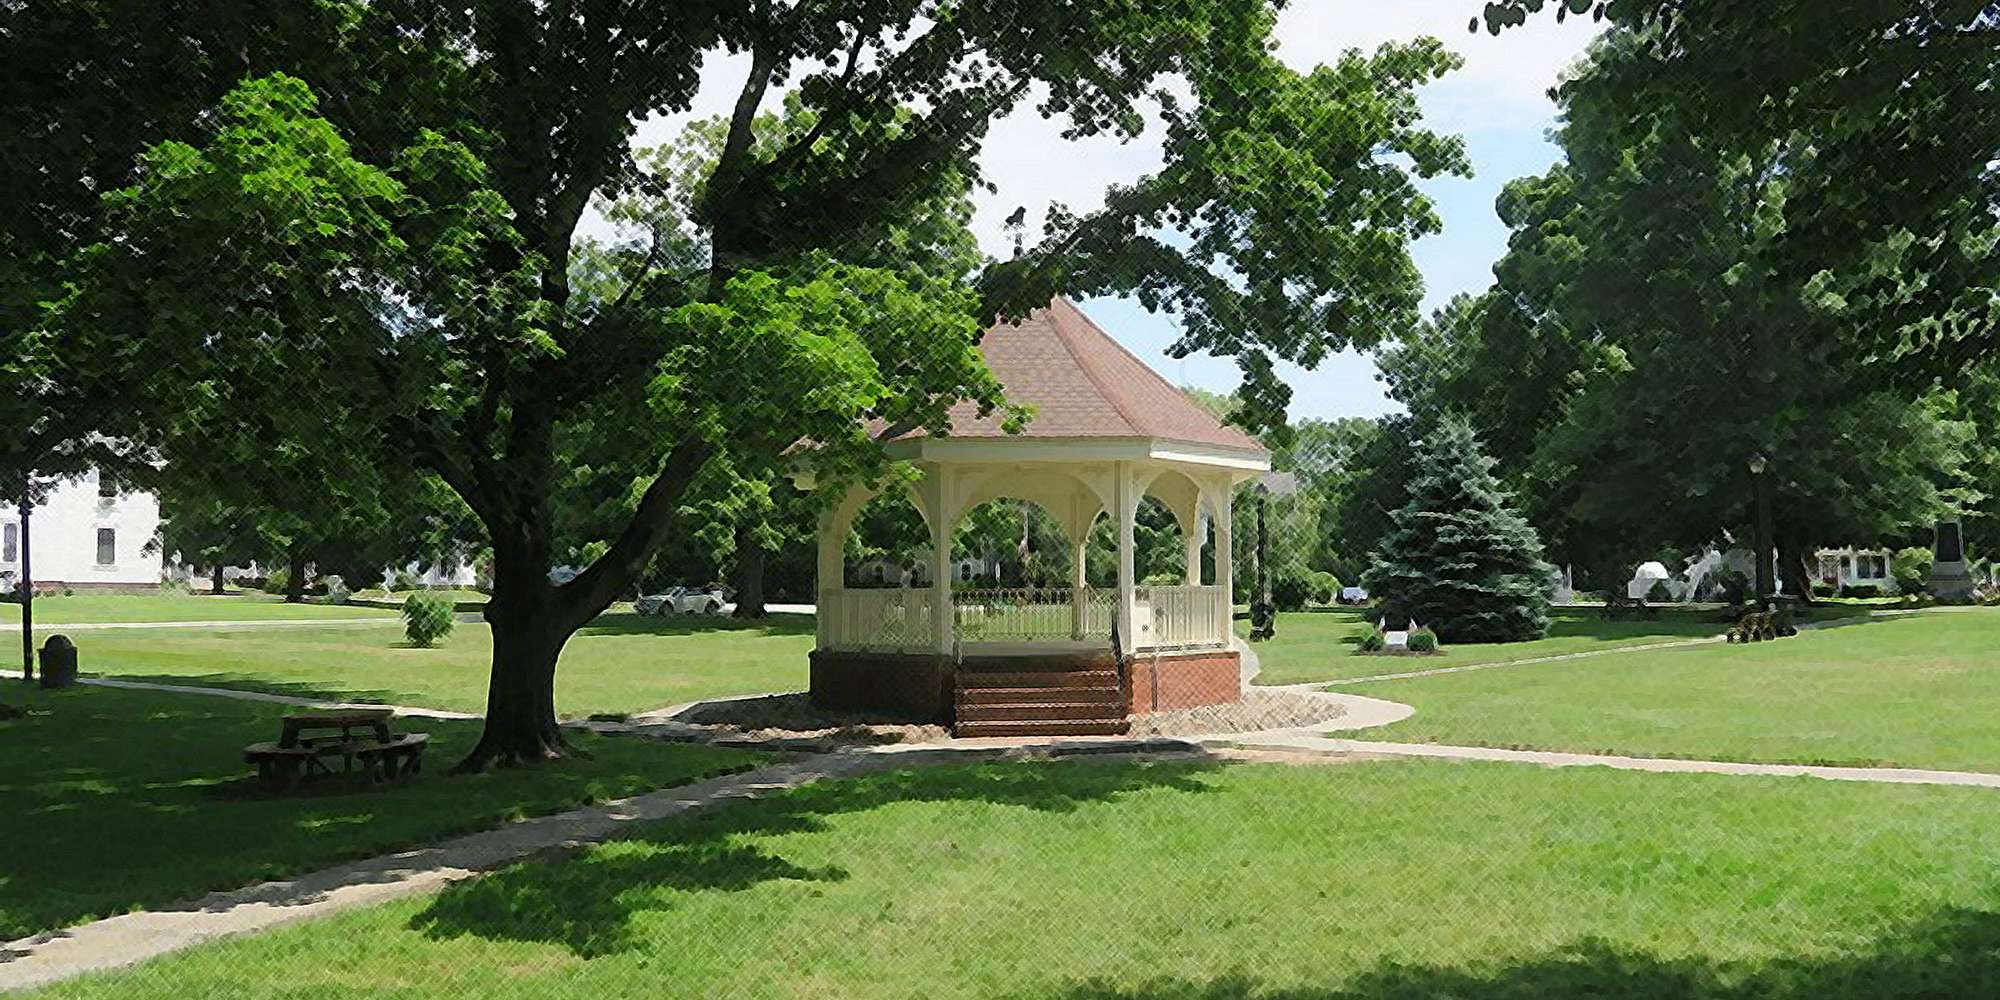 Photo of a Gazebo in Plaistow, New Hampshire